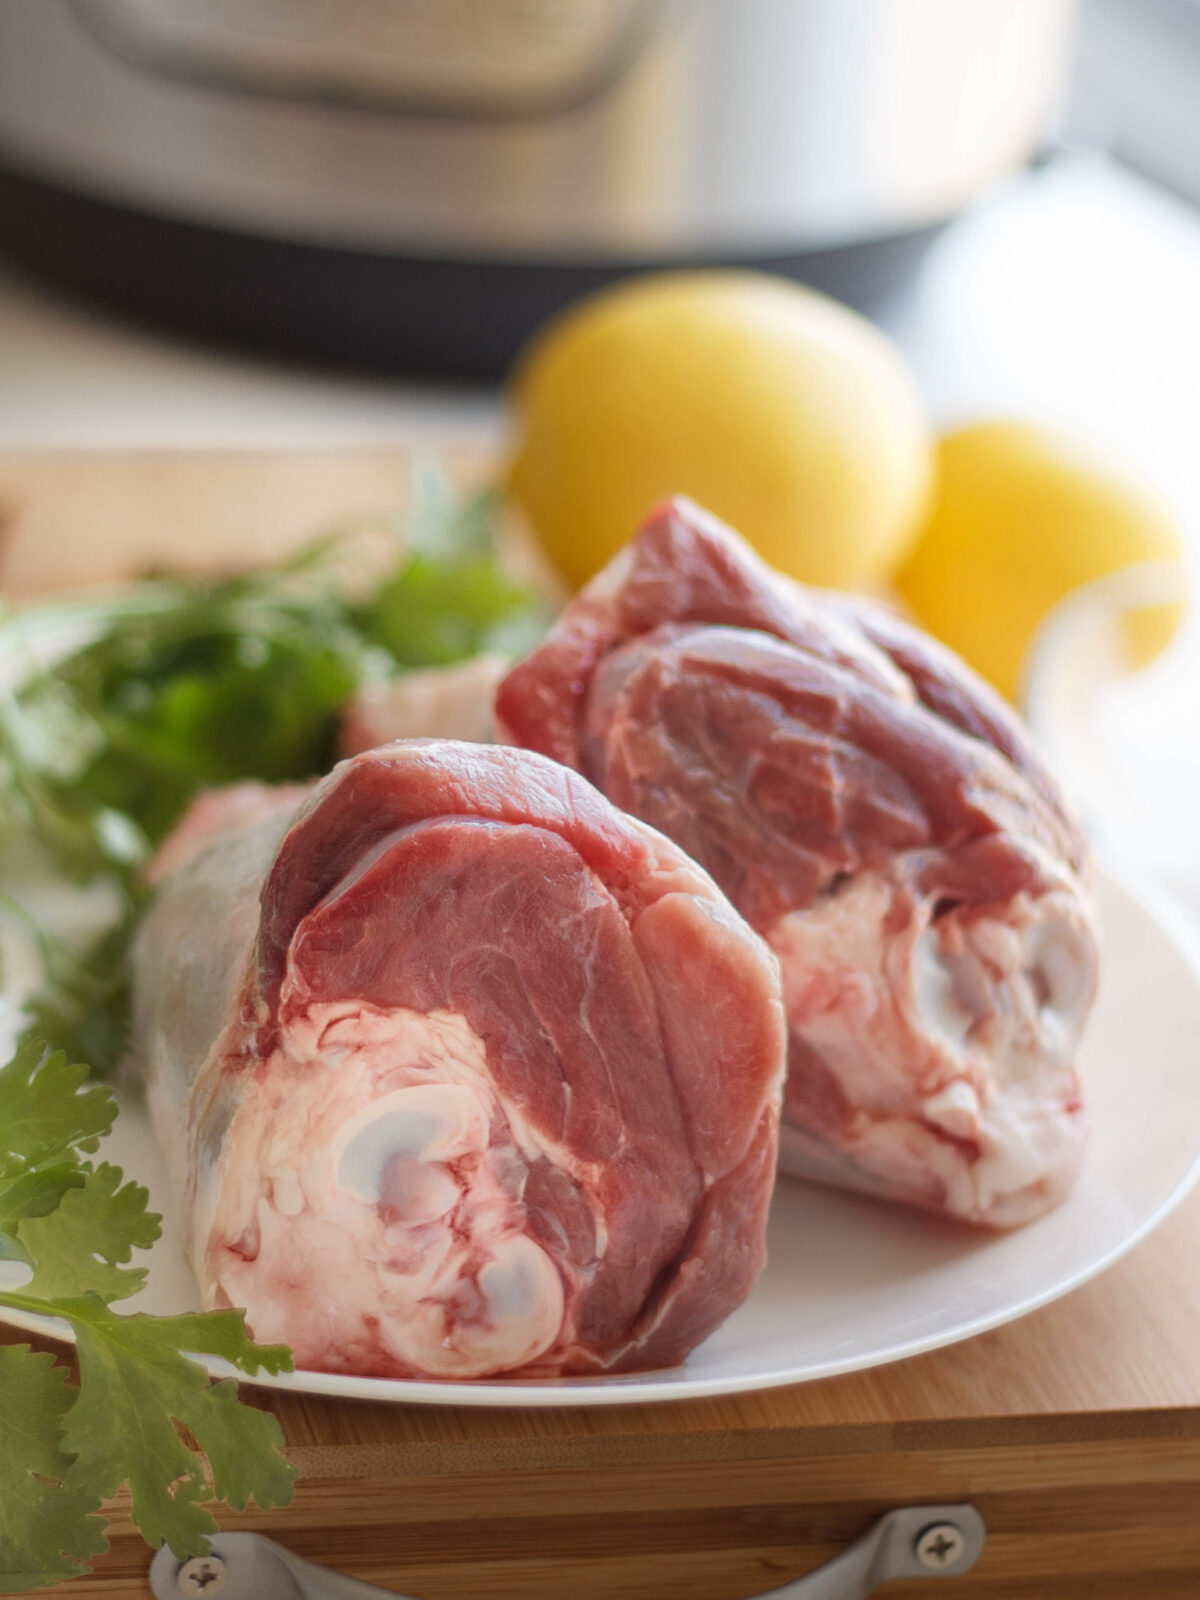 https://tasteofsham.com/wp-content/uploads/2020/06/syrian-lamb-beef-meat-for-cooking-1200x1600.jpg